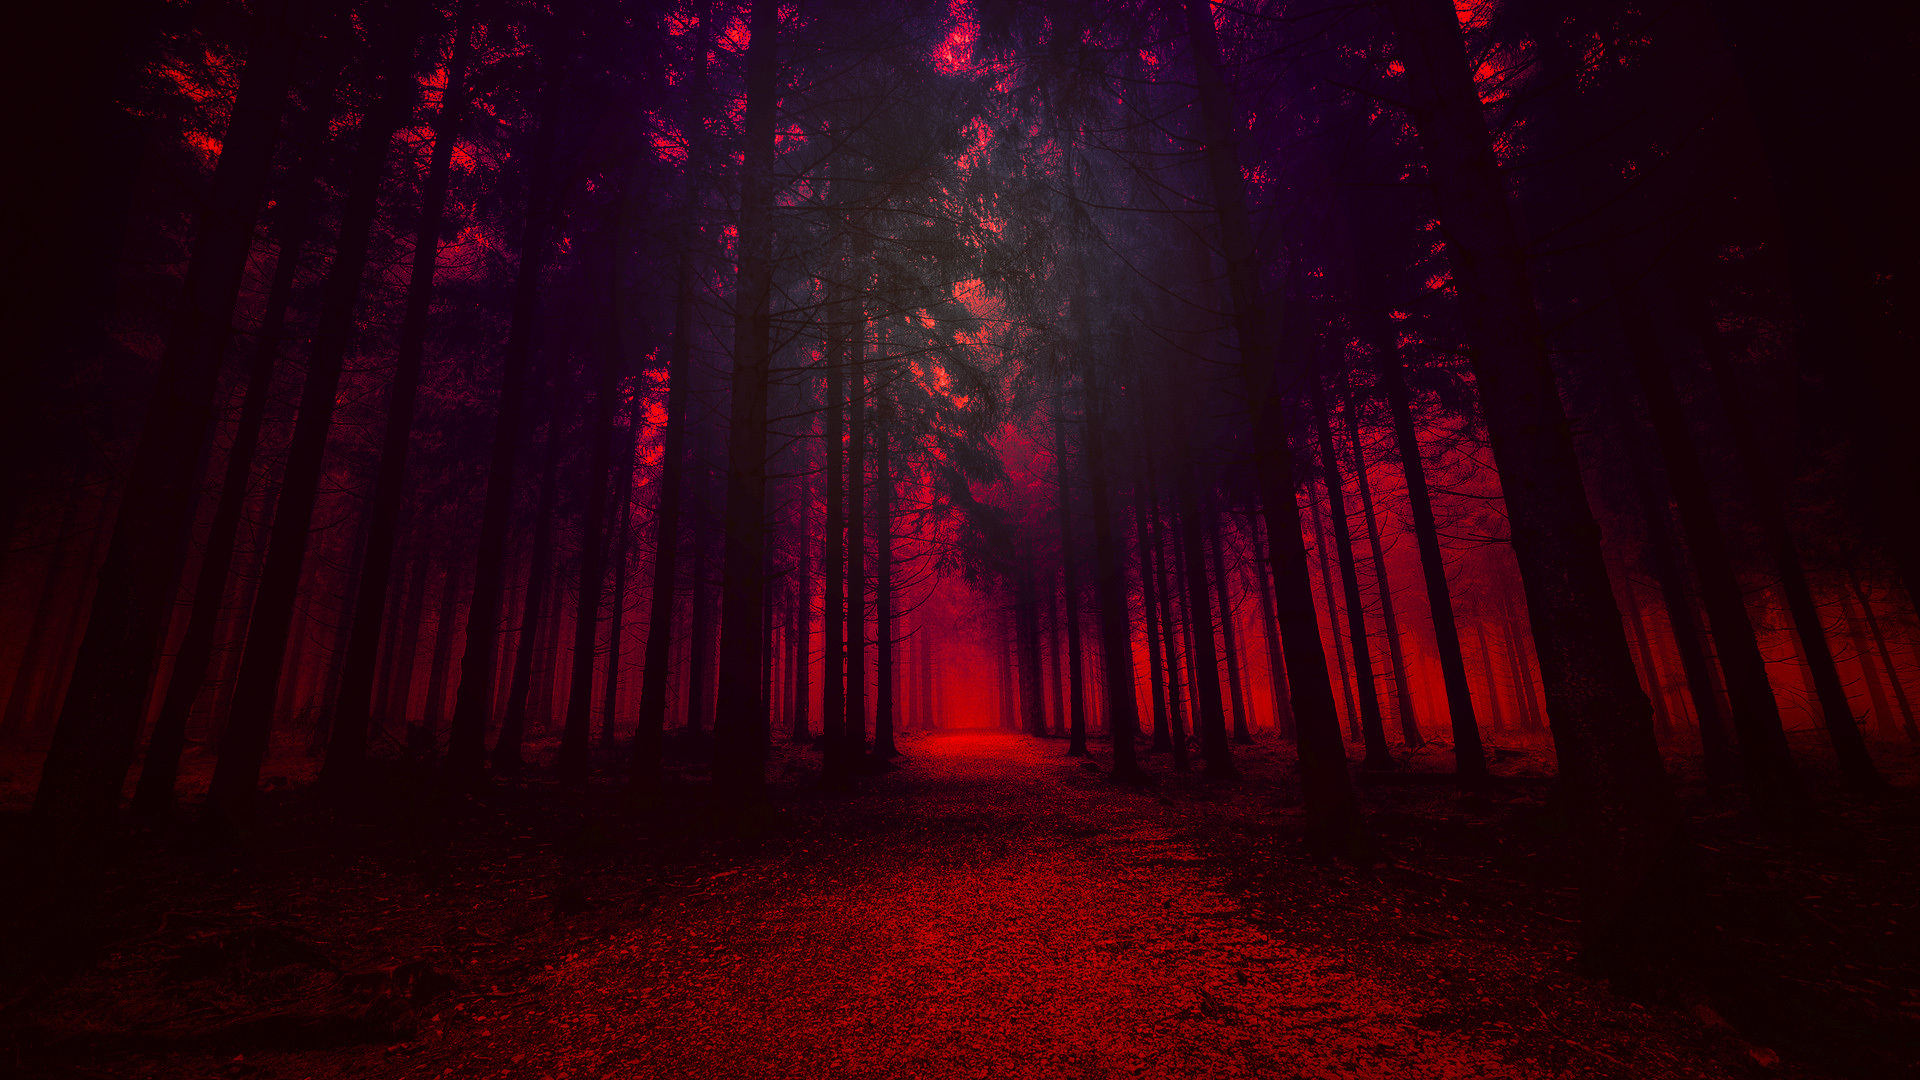 artistic-red-forest-23-1920x1080.jpg